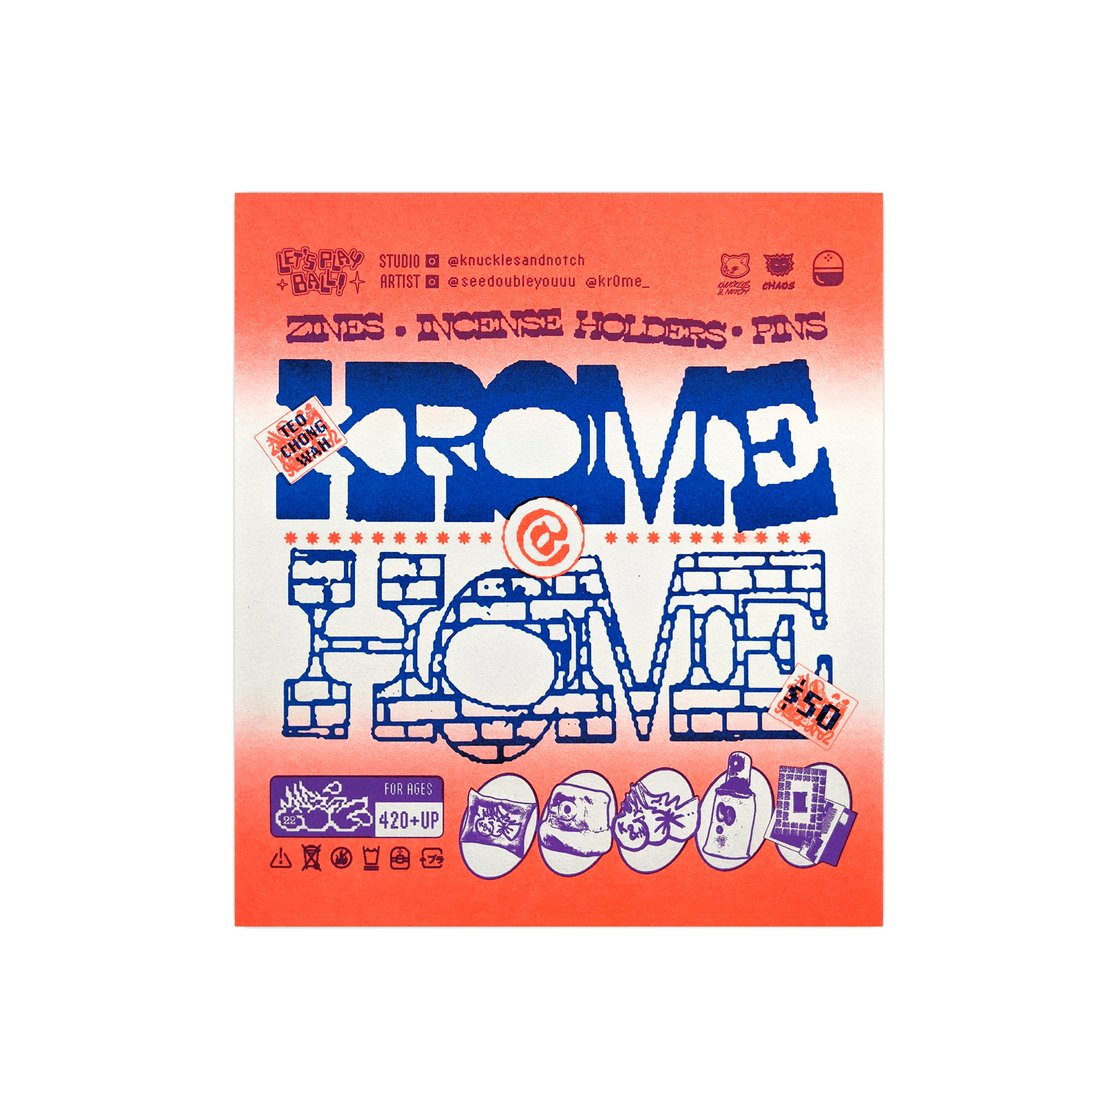 Image of Krome (Teo Chong Wah) – Gachapon Poster by Knuckles & Notch